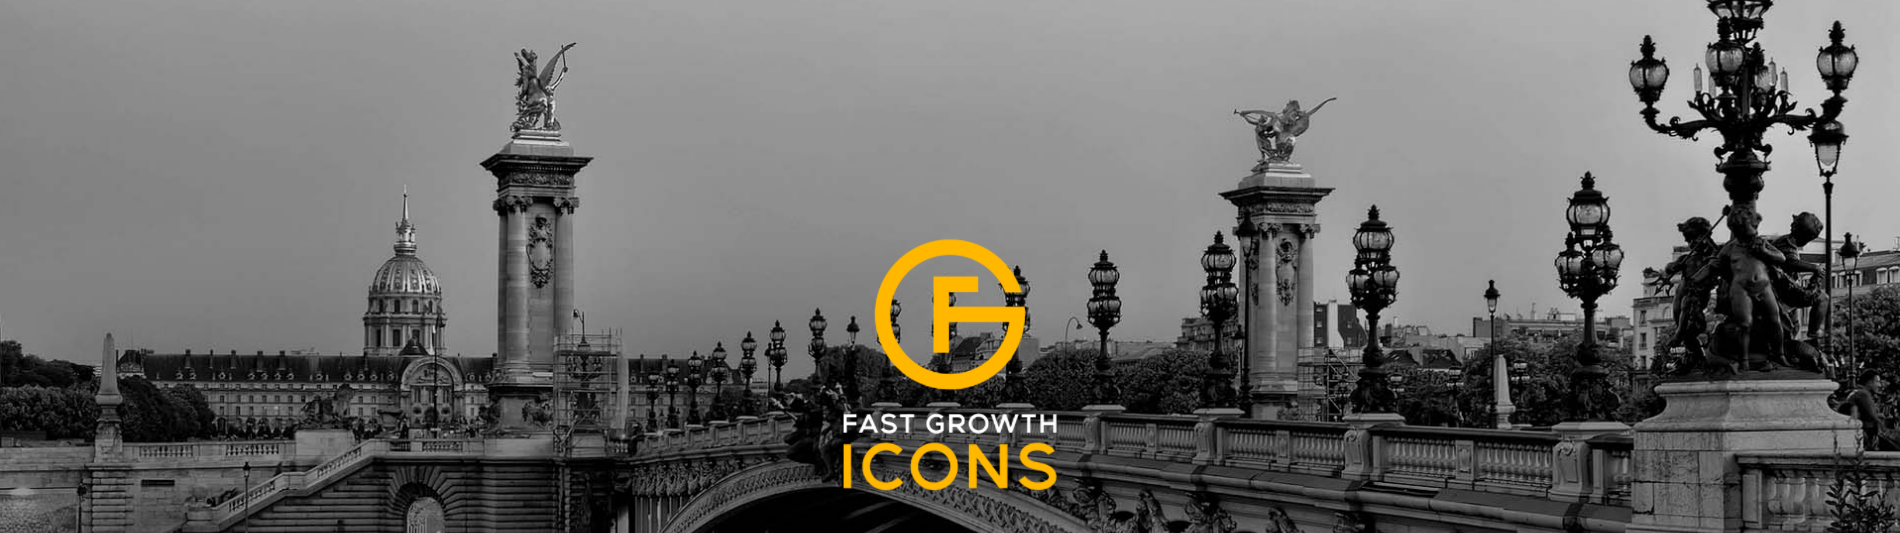 fast growth image